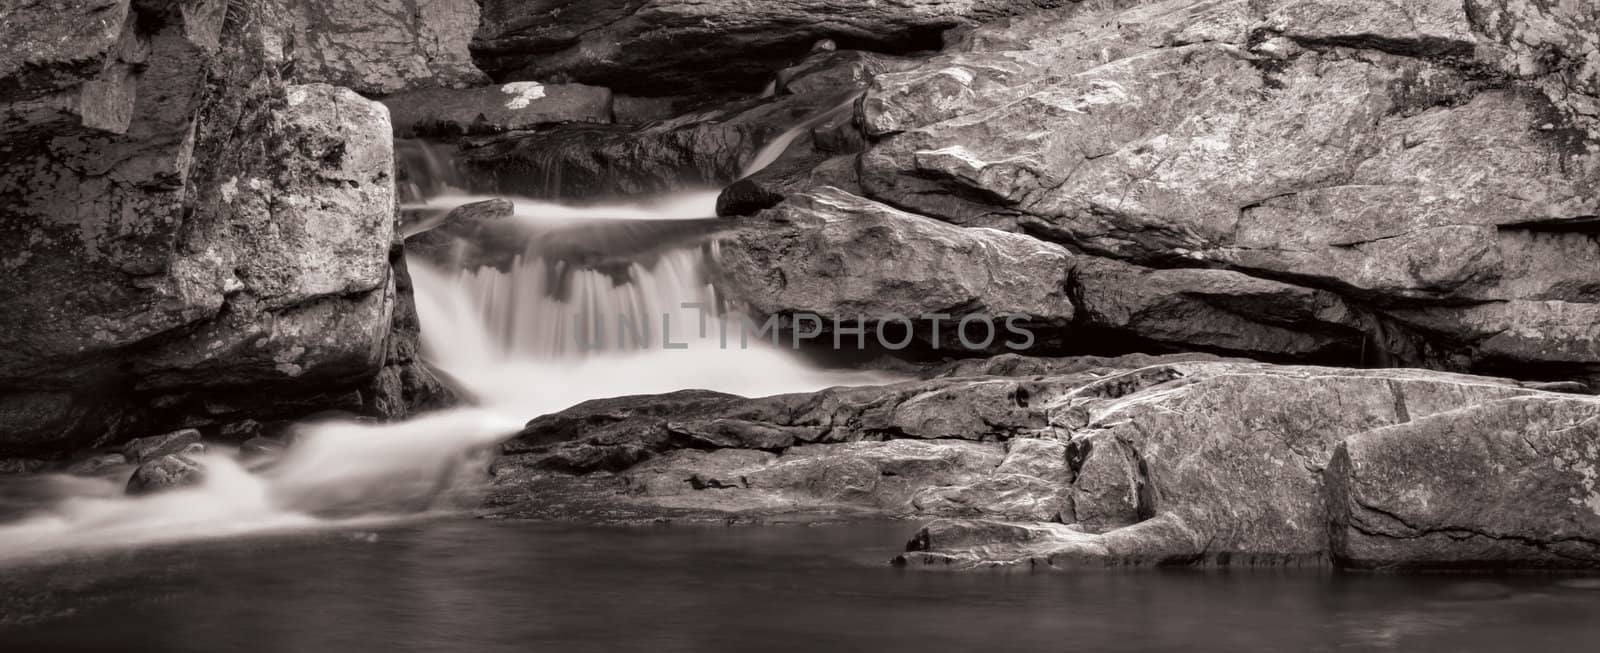 A small waterfall over rock in panorama format. Photo is in black and white.